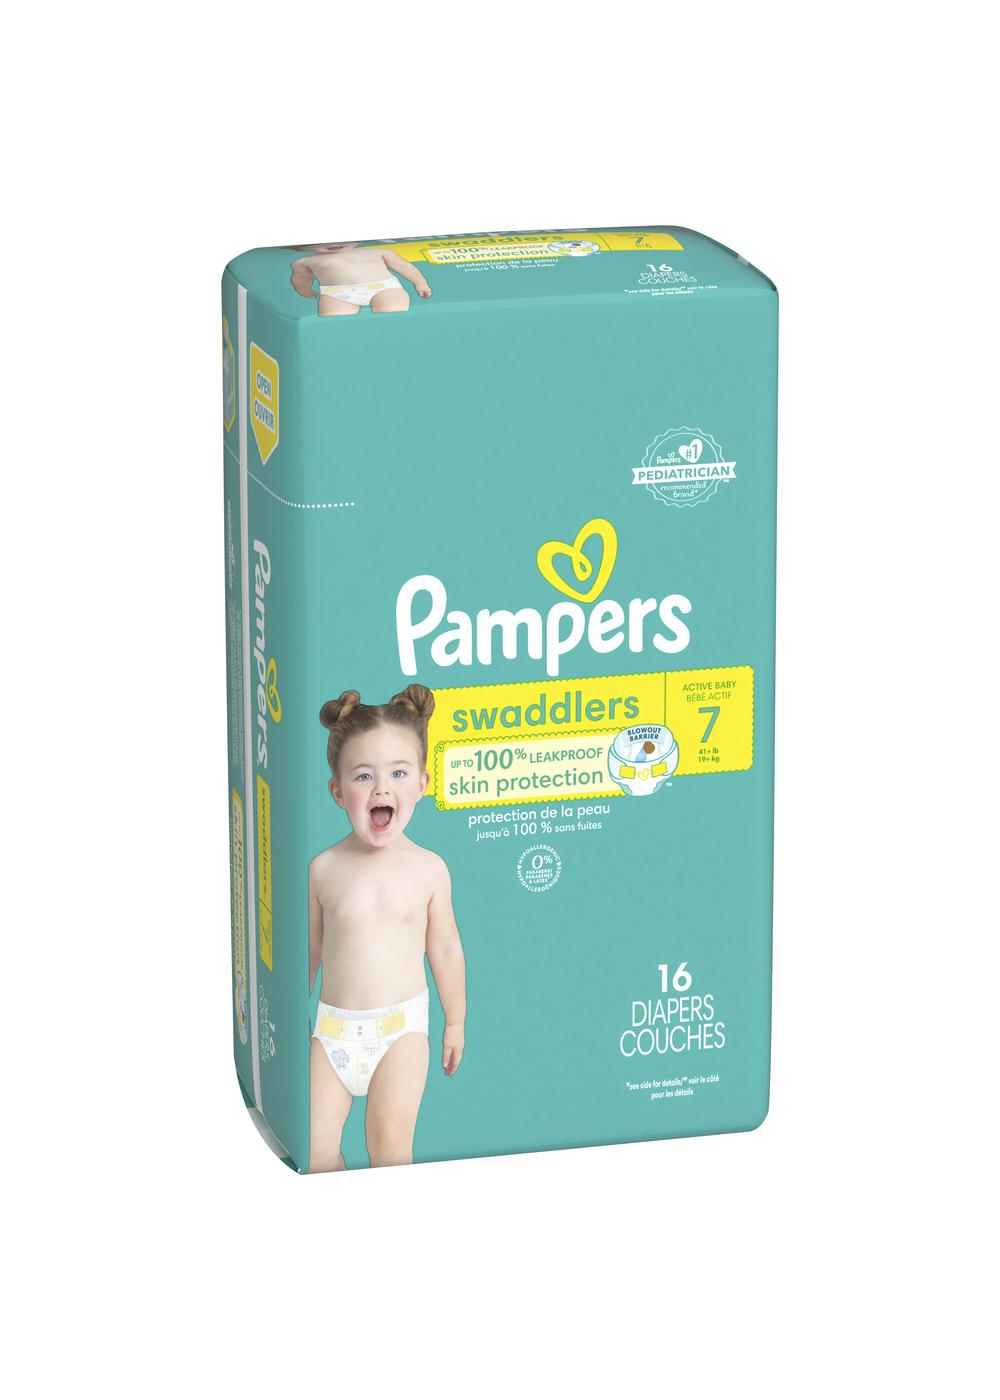 Pampers Swaddlers Baby Diapers - Size 7; image 3 of 3